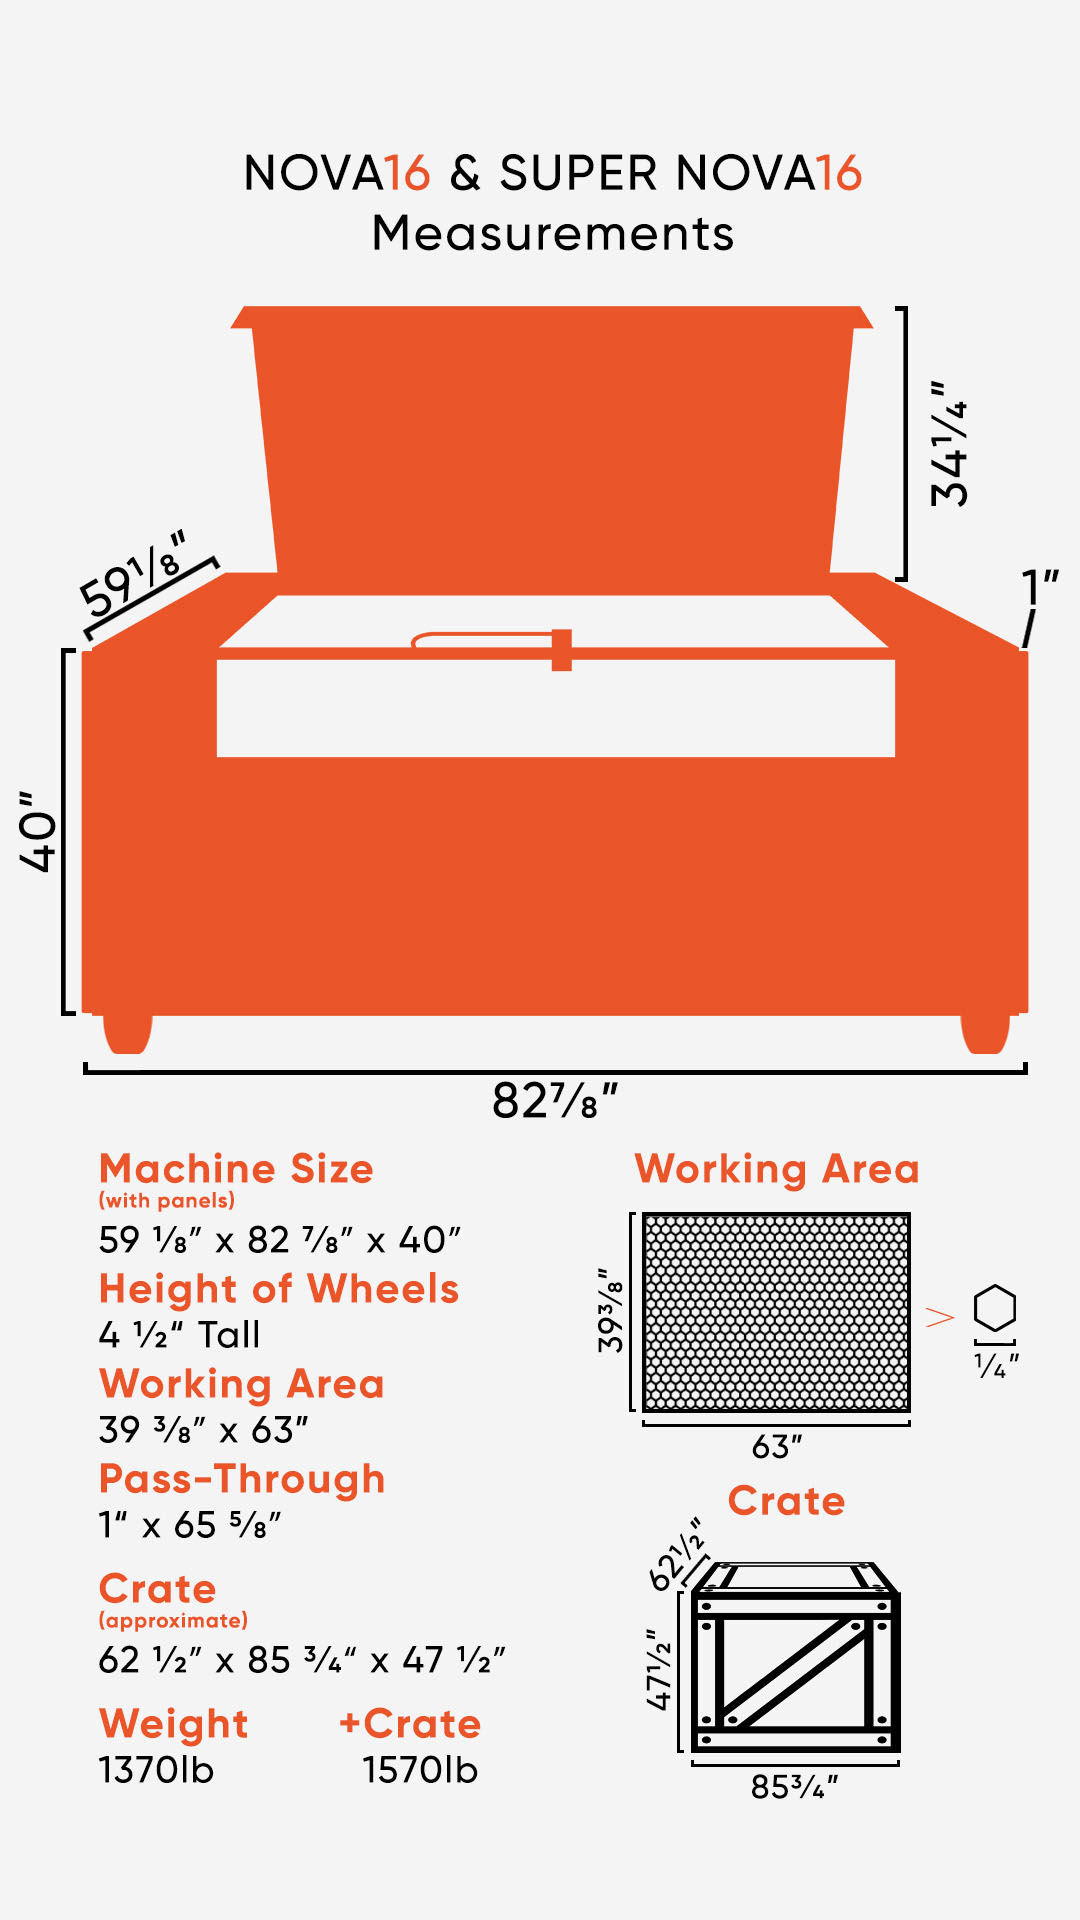 Graphic showing the dimensions of the Super NOVA 16 laser, crate size, and weight info